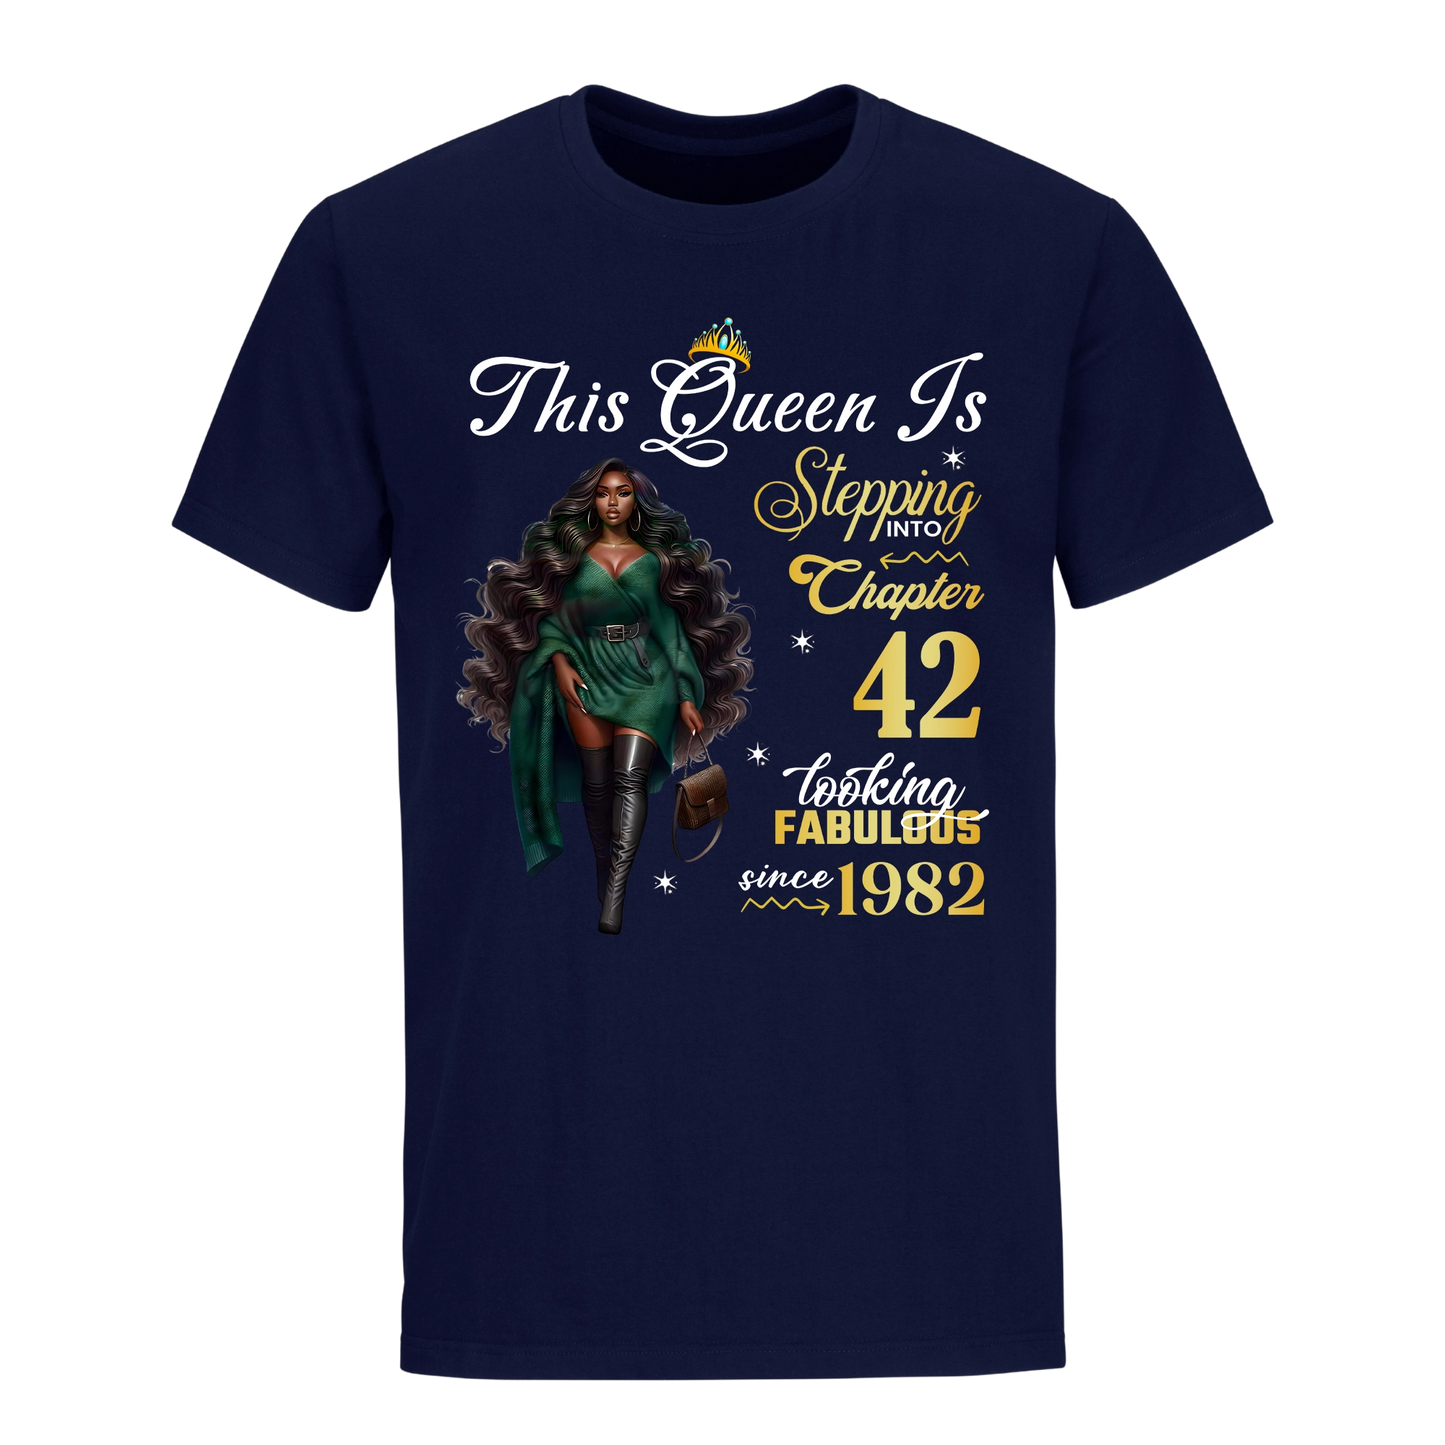 THIS QUEEN IS LOOKING FABULOUS 42 UNISEX SHIRT